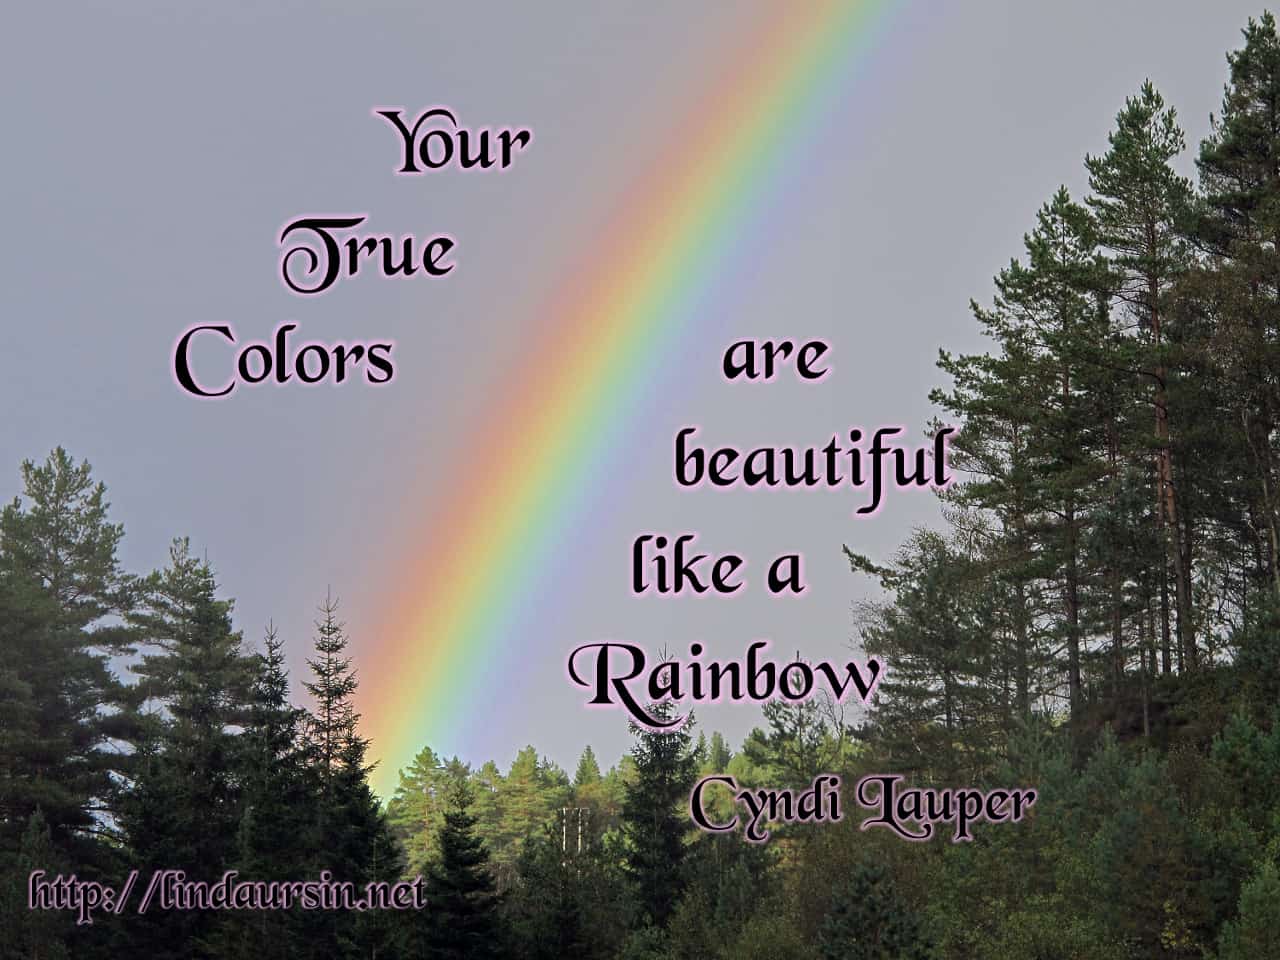 Your true colors are truly beautiful